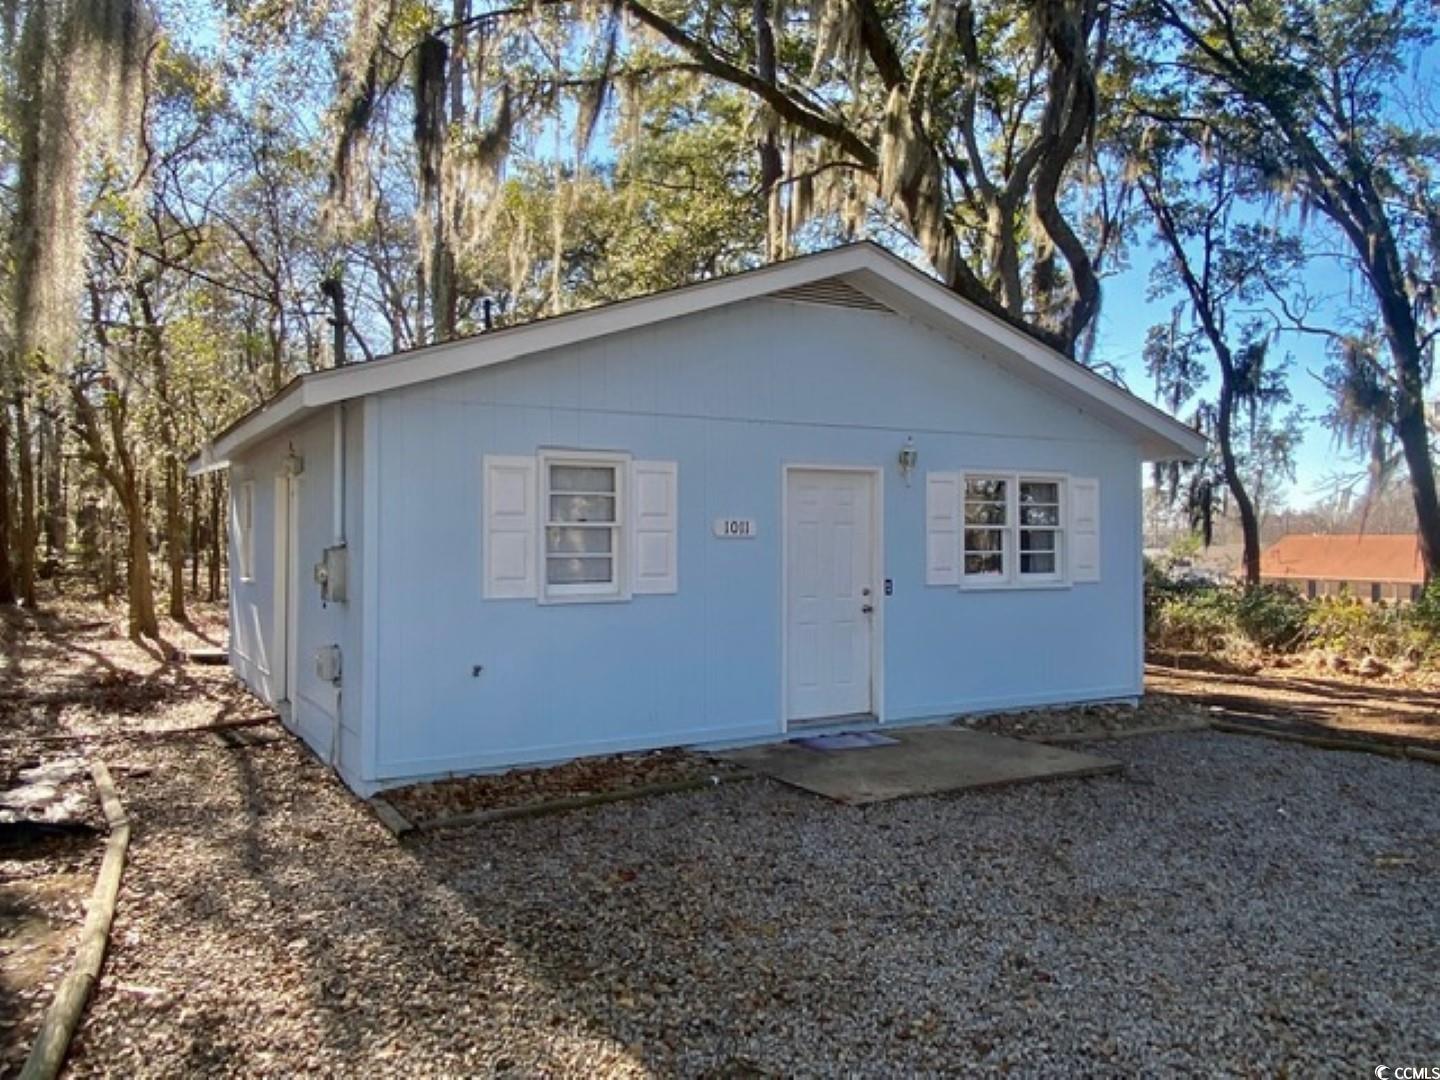 wonderful investment opportunity is available with this 2 bedroom 1 bath home situated on .34 acres of land shaded by beautiful oak trees. charming floorplan offering modest square footage suitable for both a starter home and renters. located in a central location minutes from downtown conway and coastal carolina university as well as 20 minutes to the beach. schedule a tour today !!!